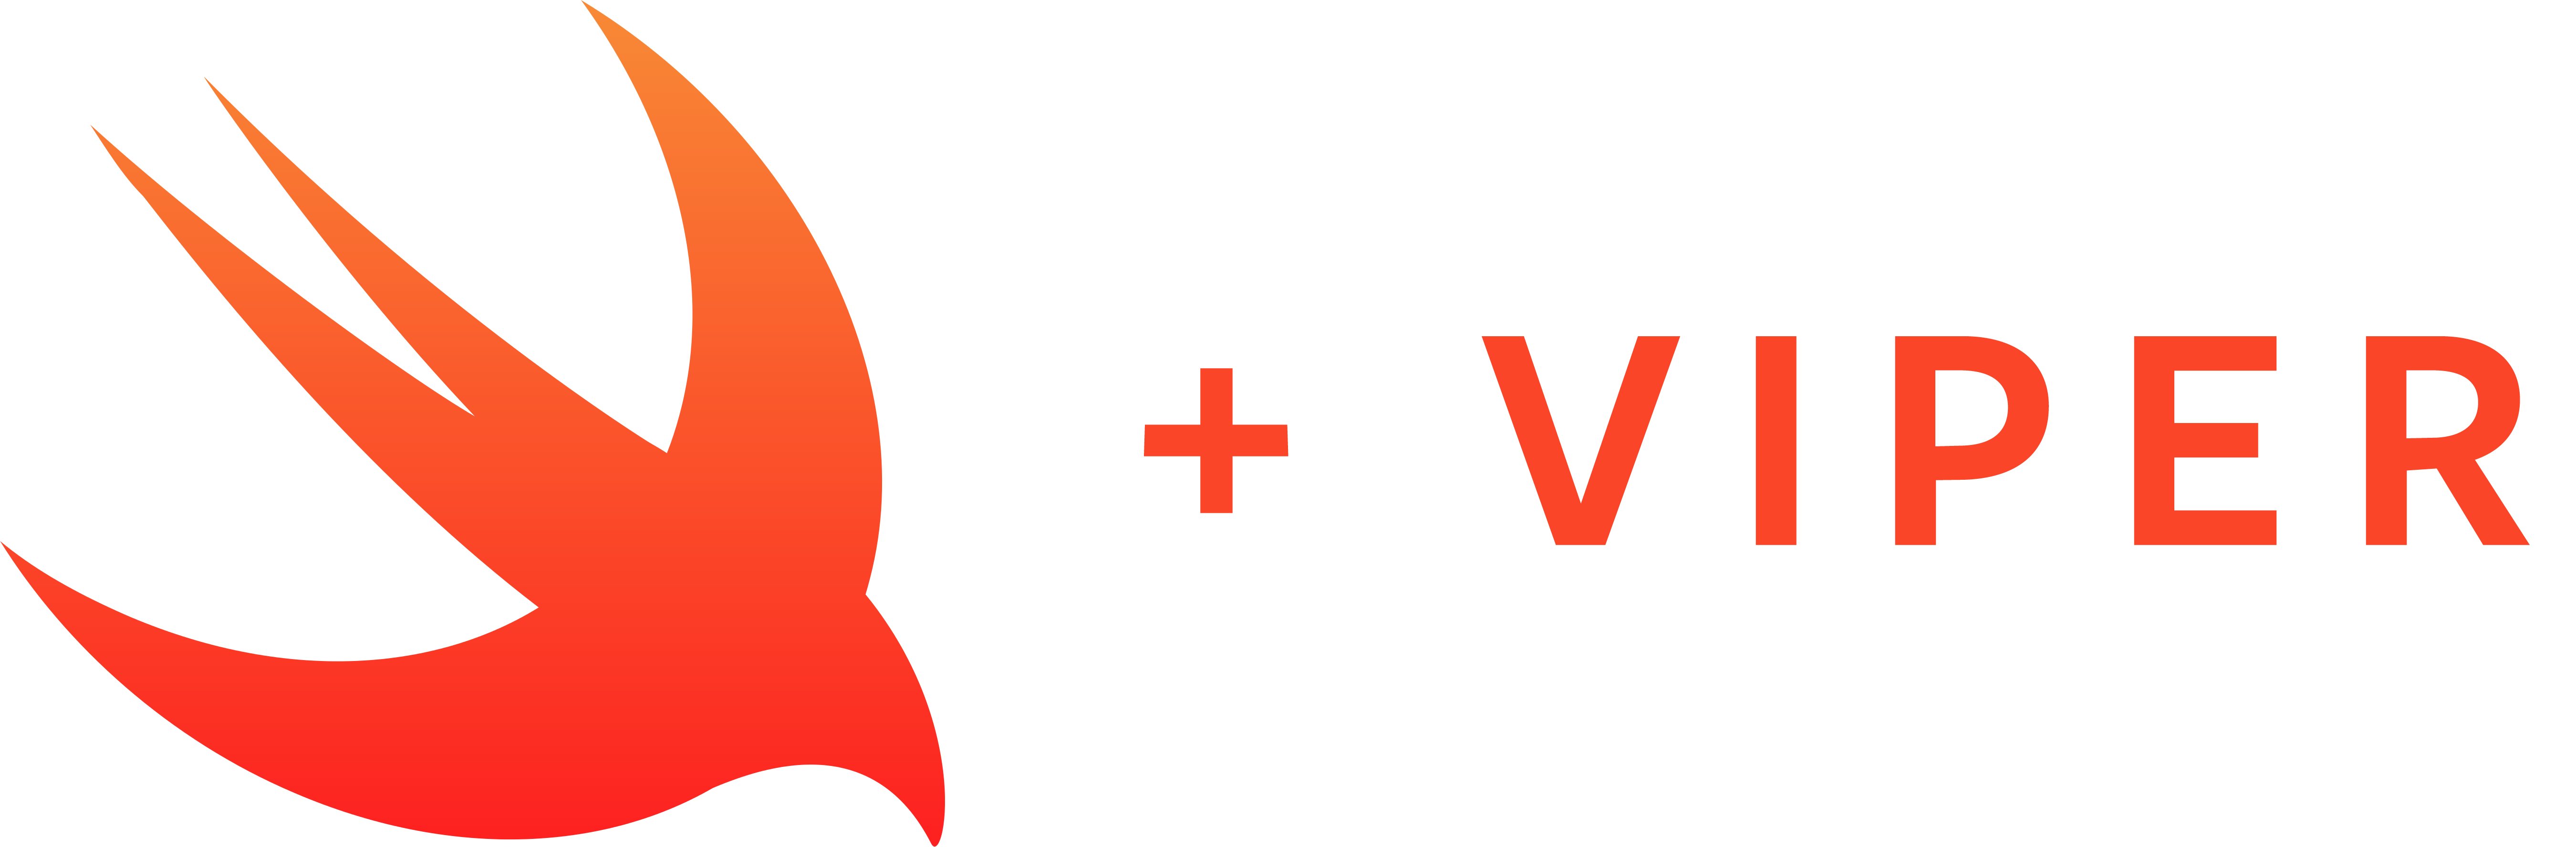 Writing an app with VIPER architecture - Part 2